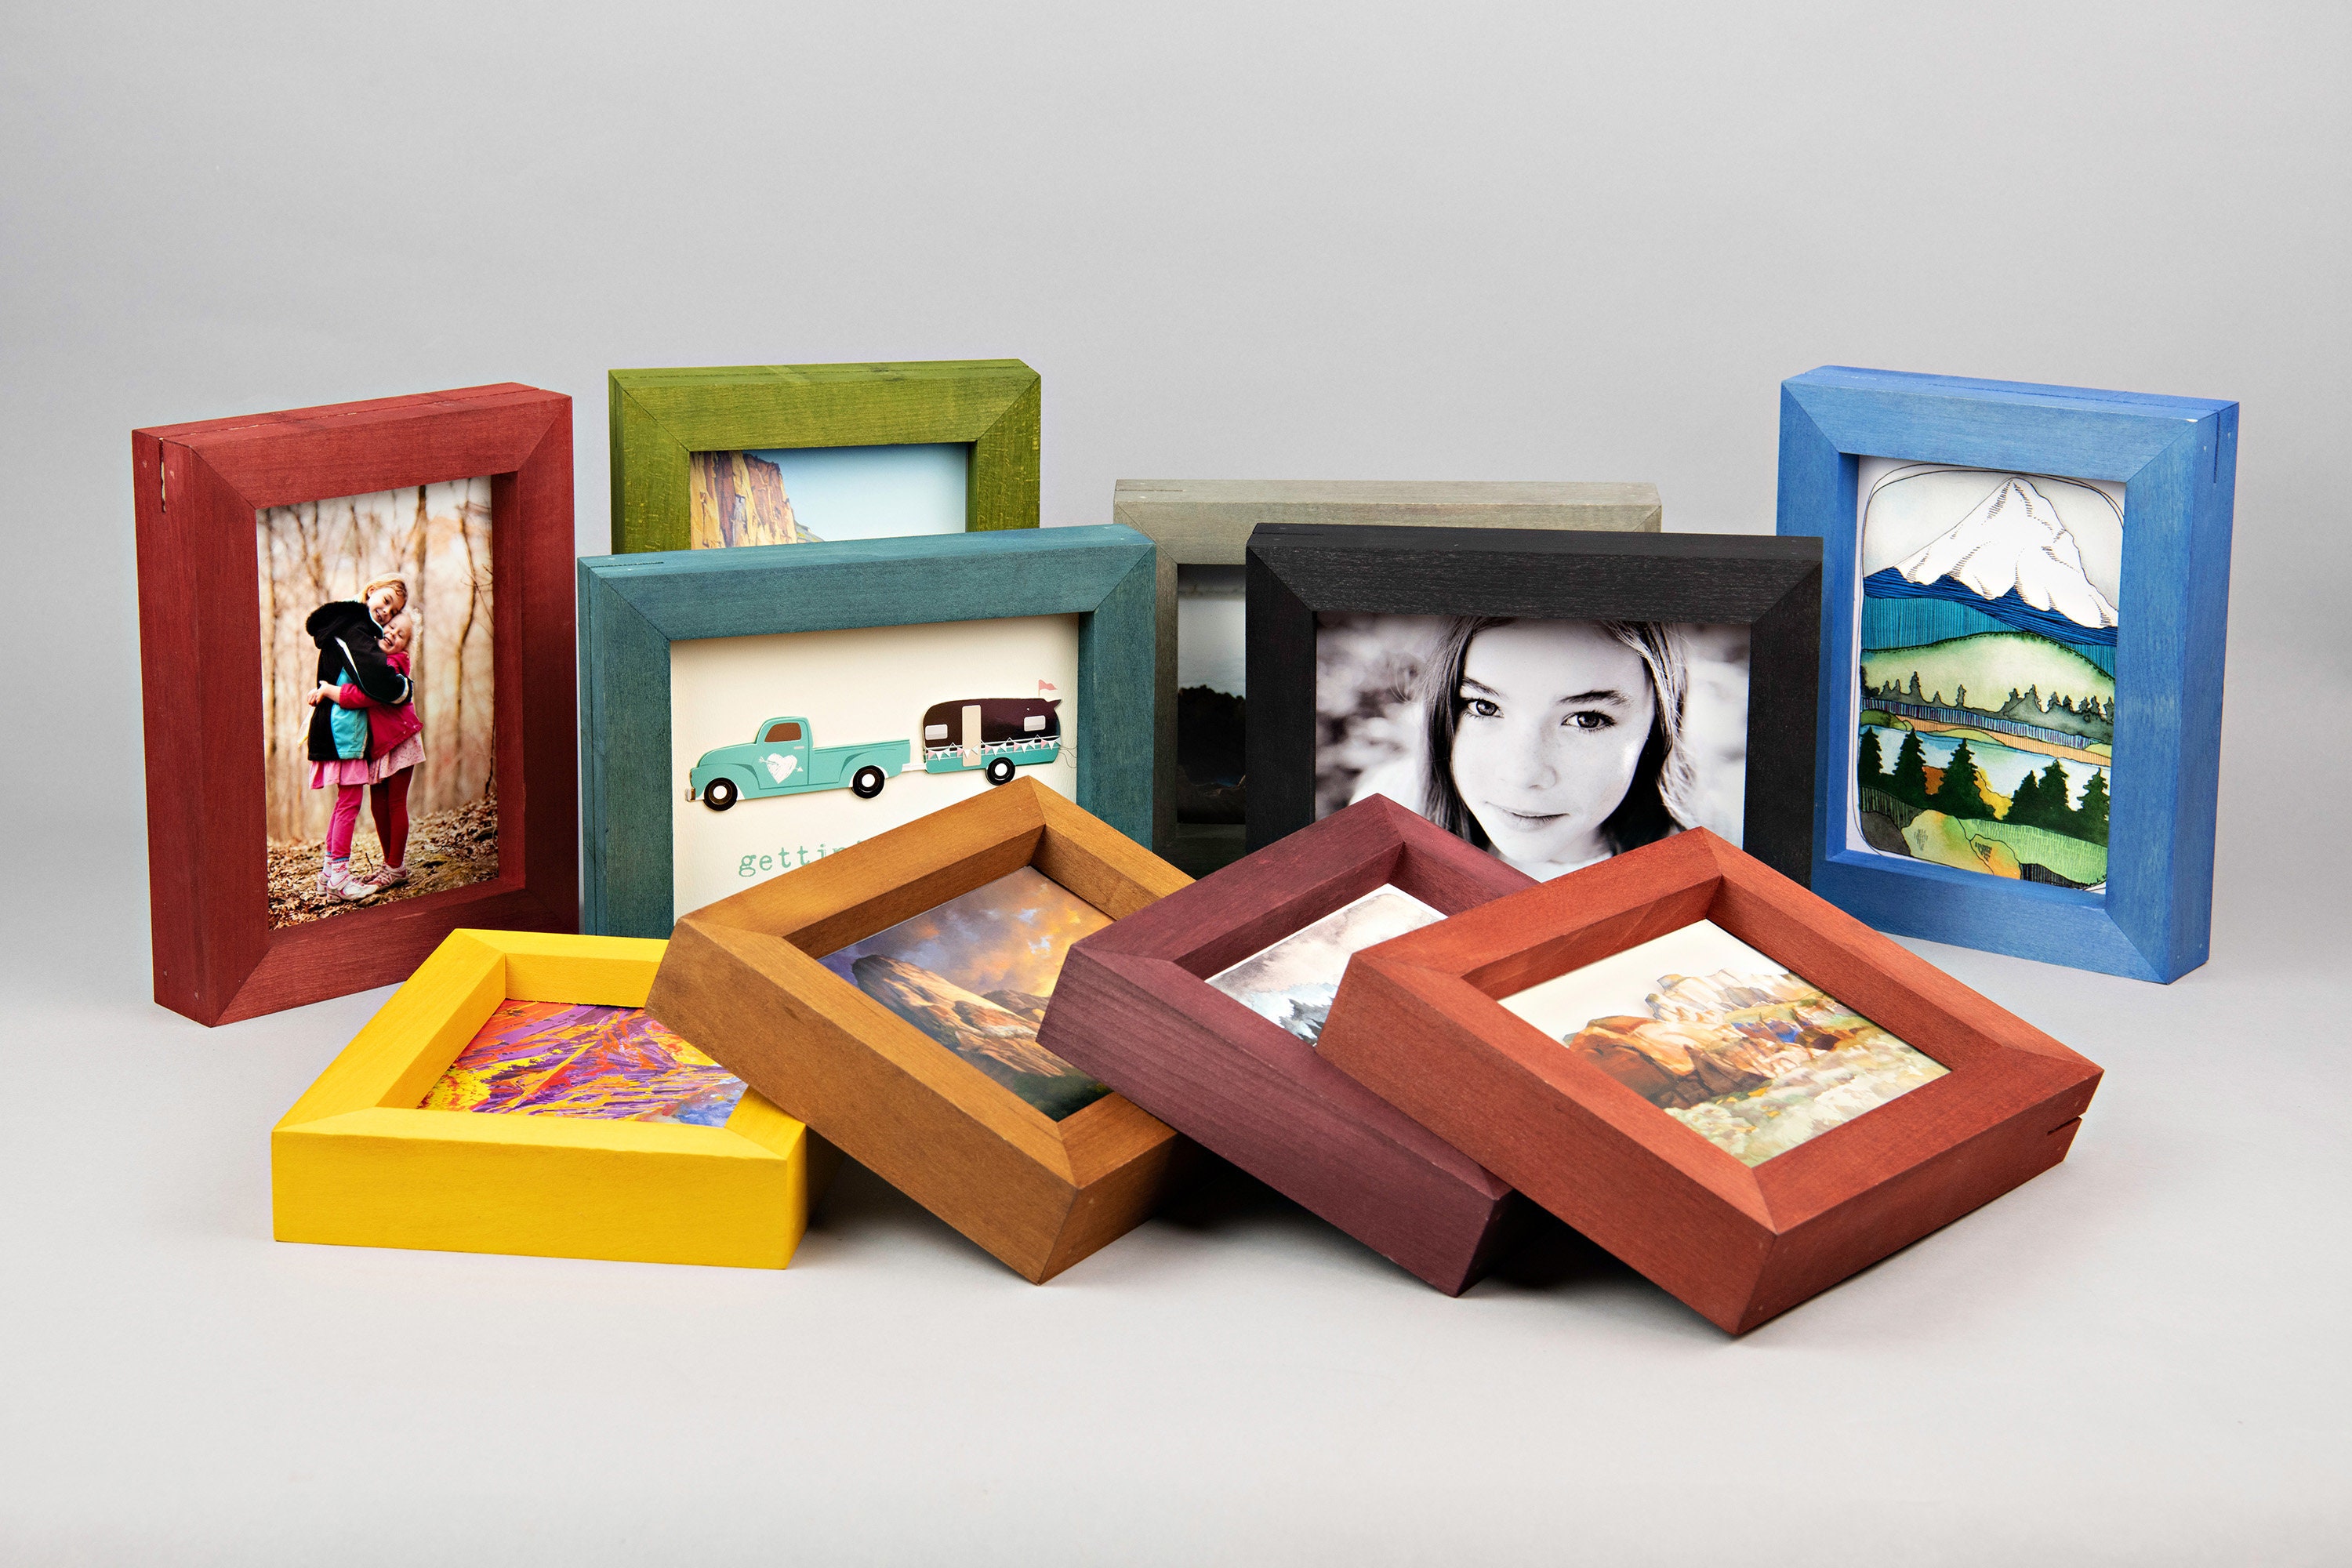 Double-Sided Photo Frames - Glass and Wood - Brown - Natural